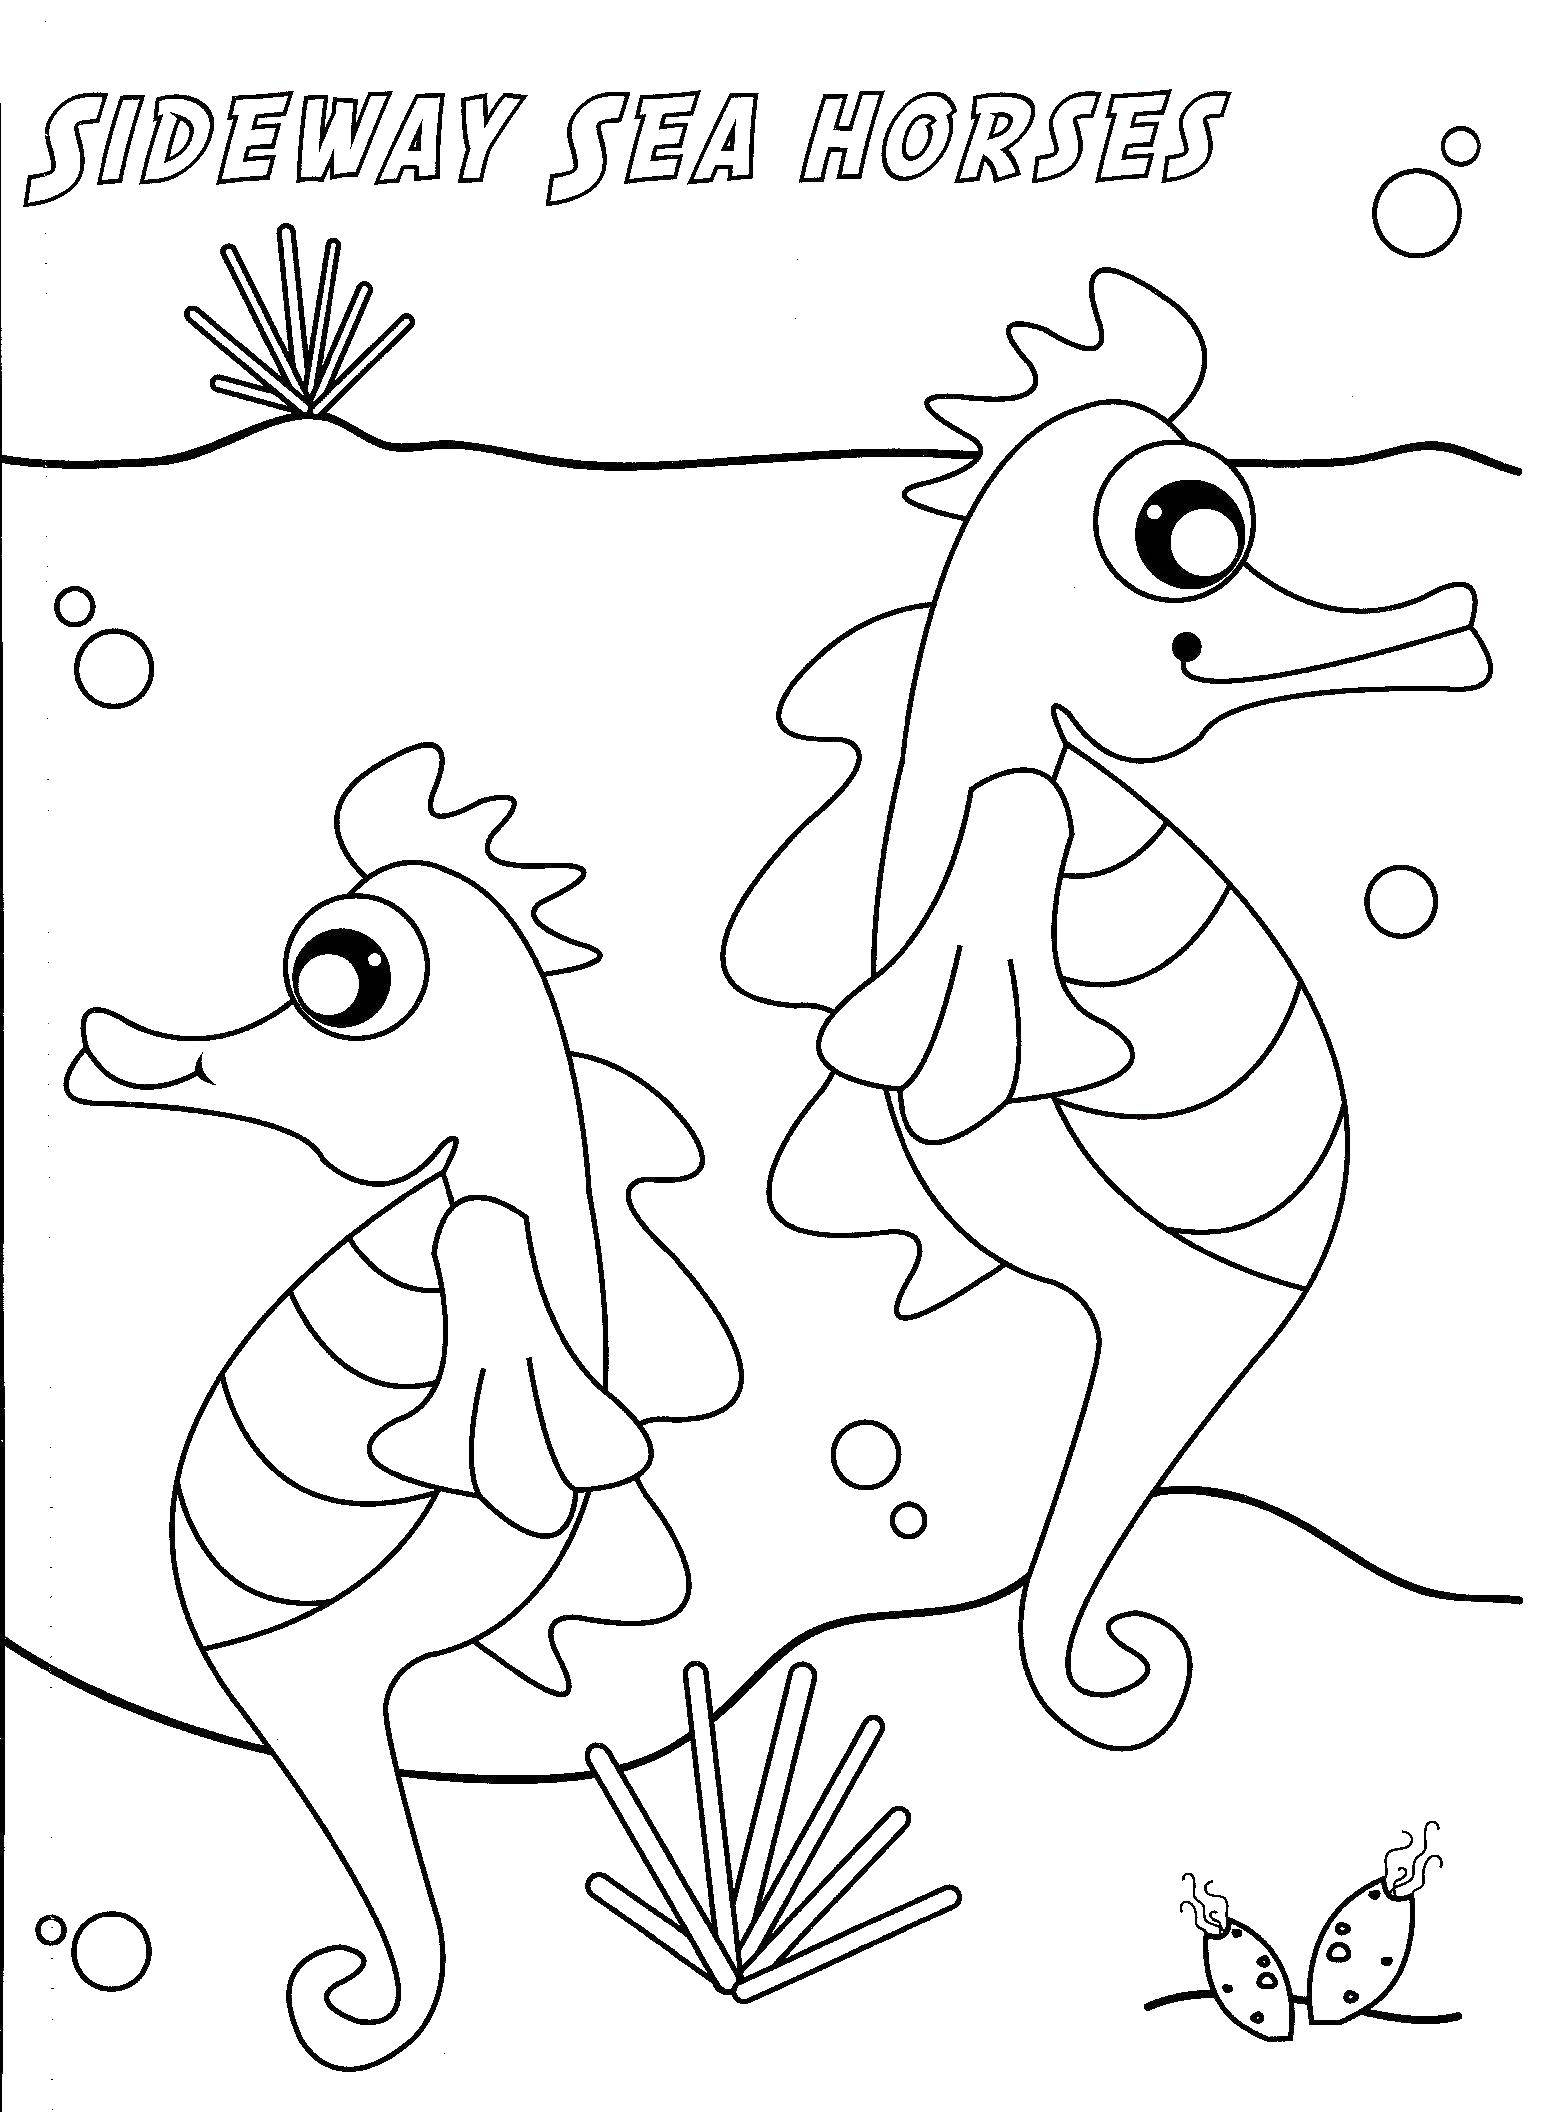 Coloring Seahorses in the water. Category marine. Tags:  Underwater world.